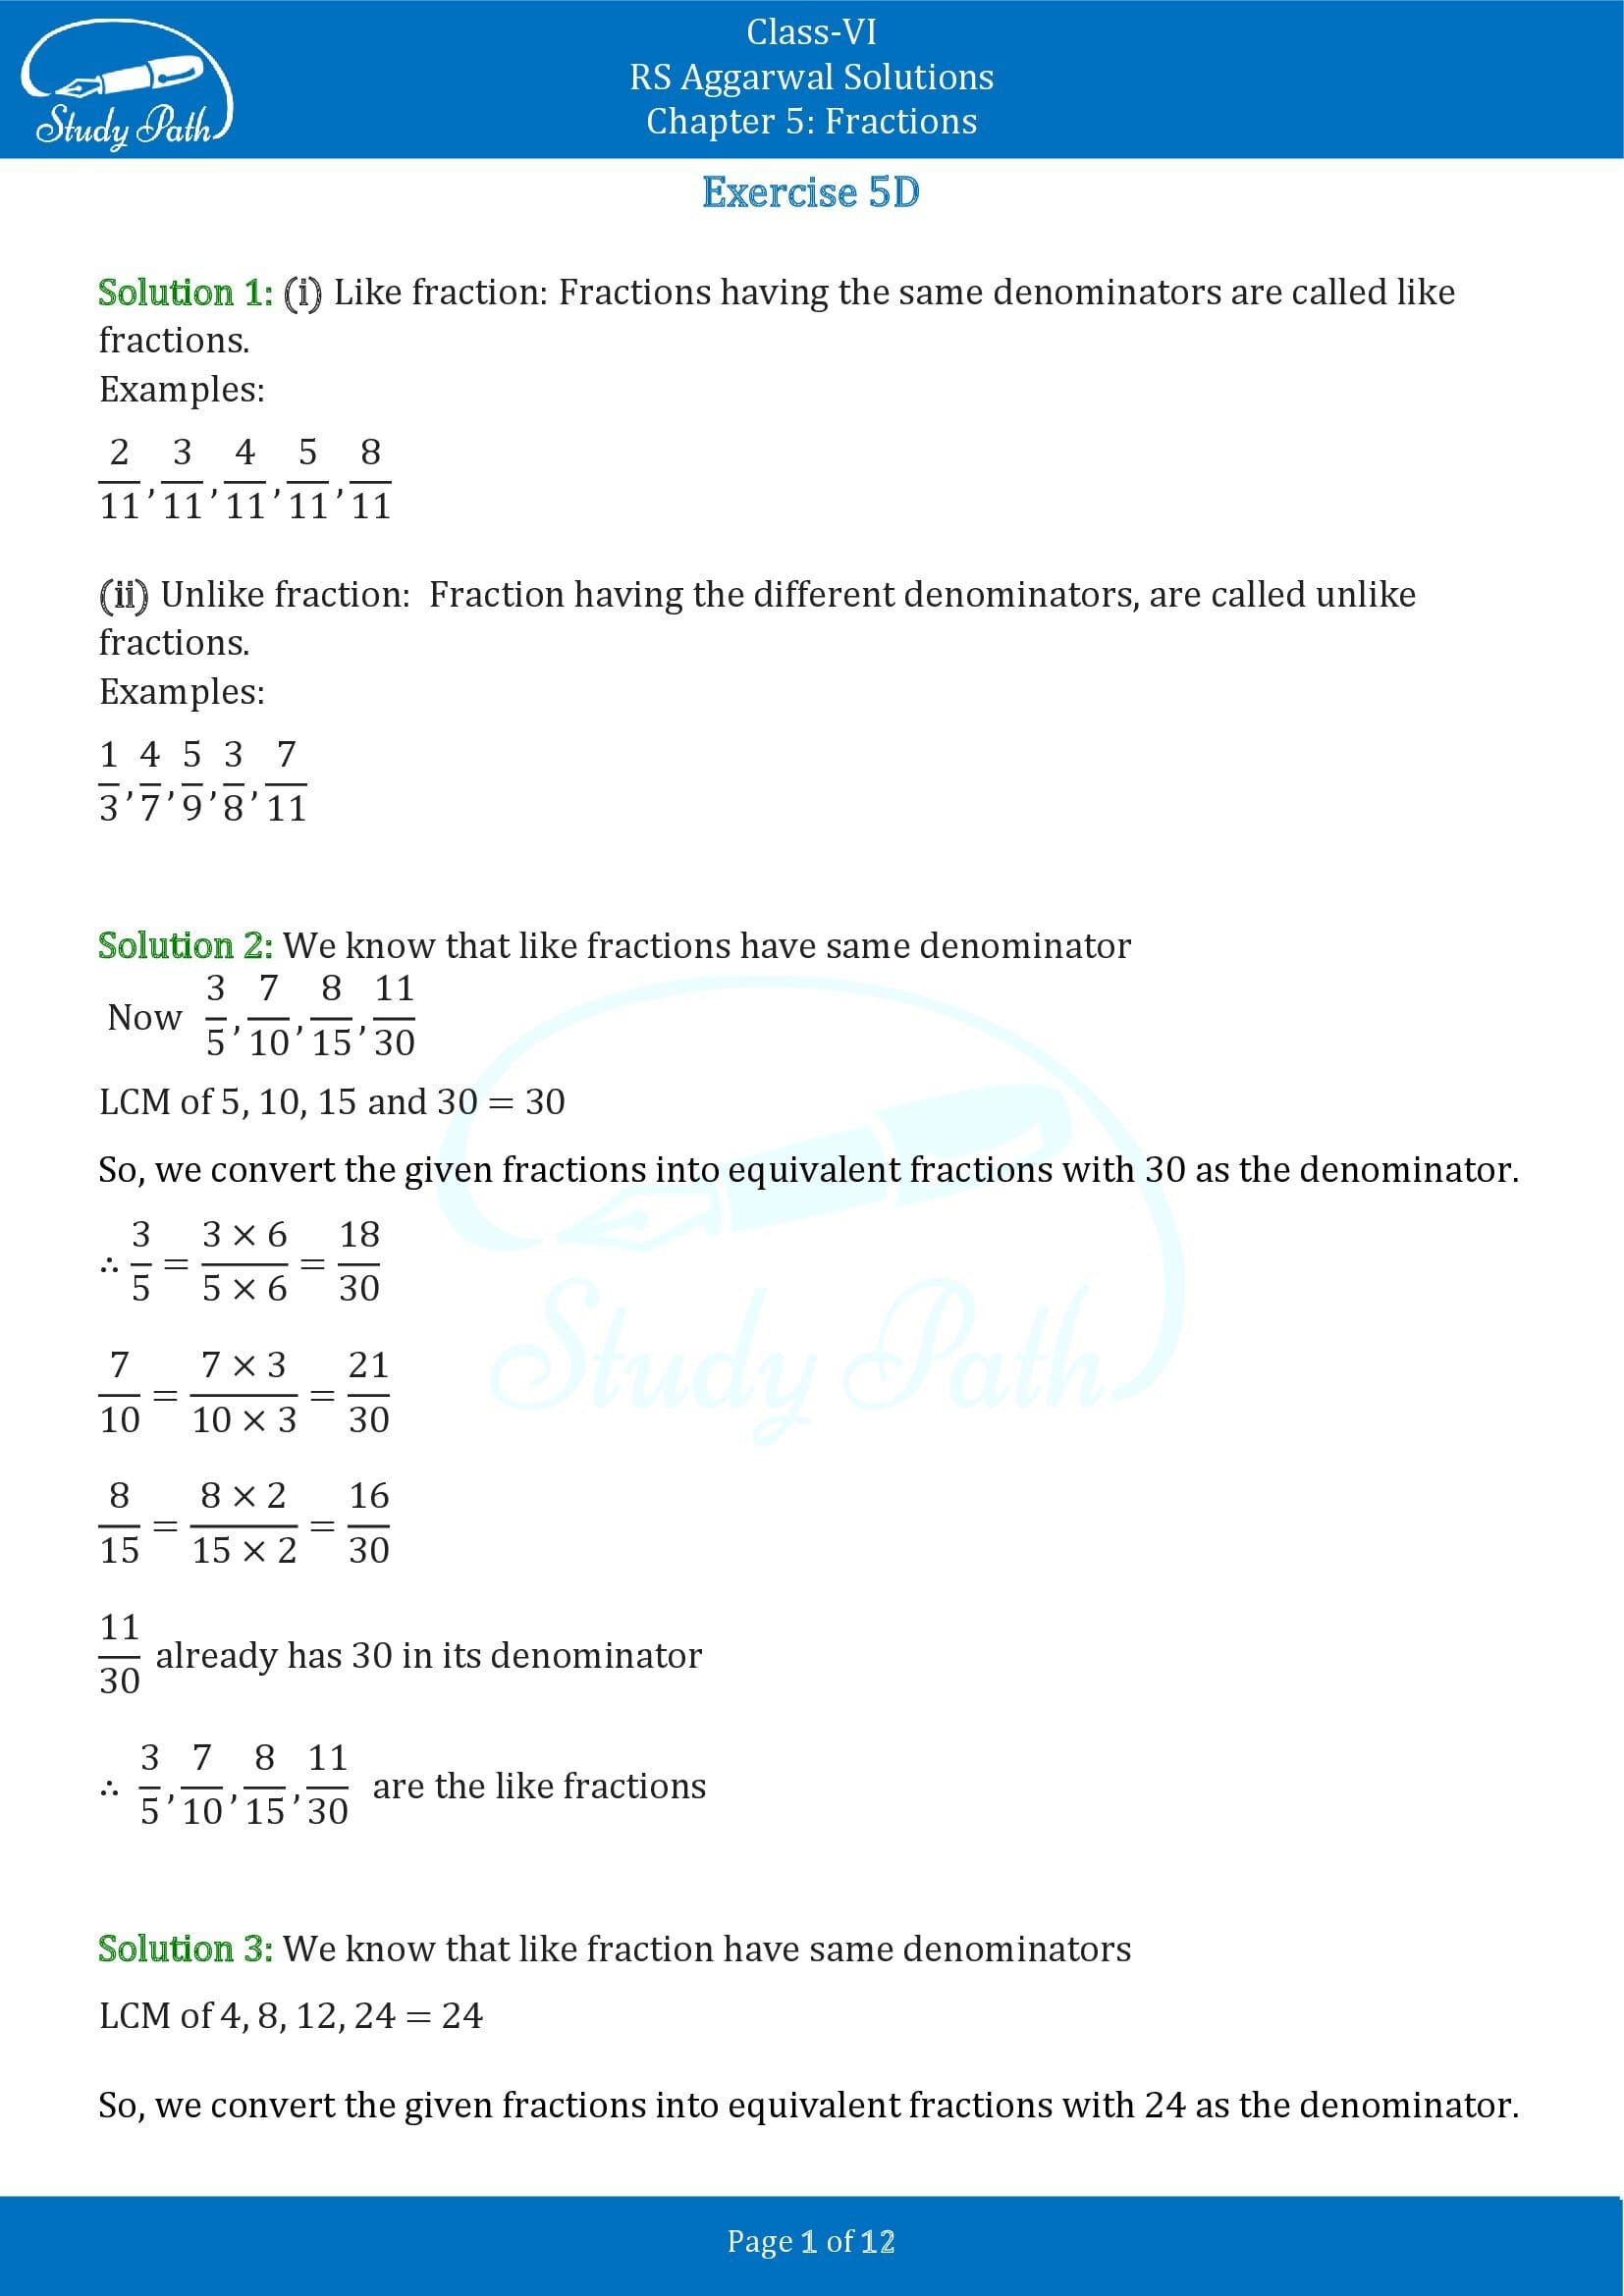 RS Aggarwal Solutions Class 6 Chapter 5 Fractions Exercise 5D 0001